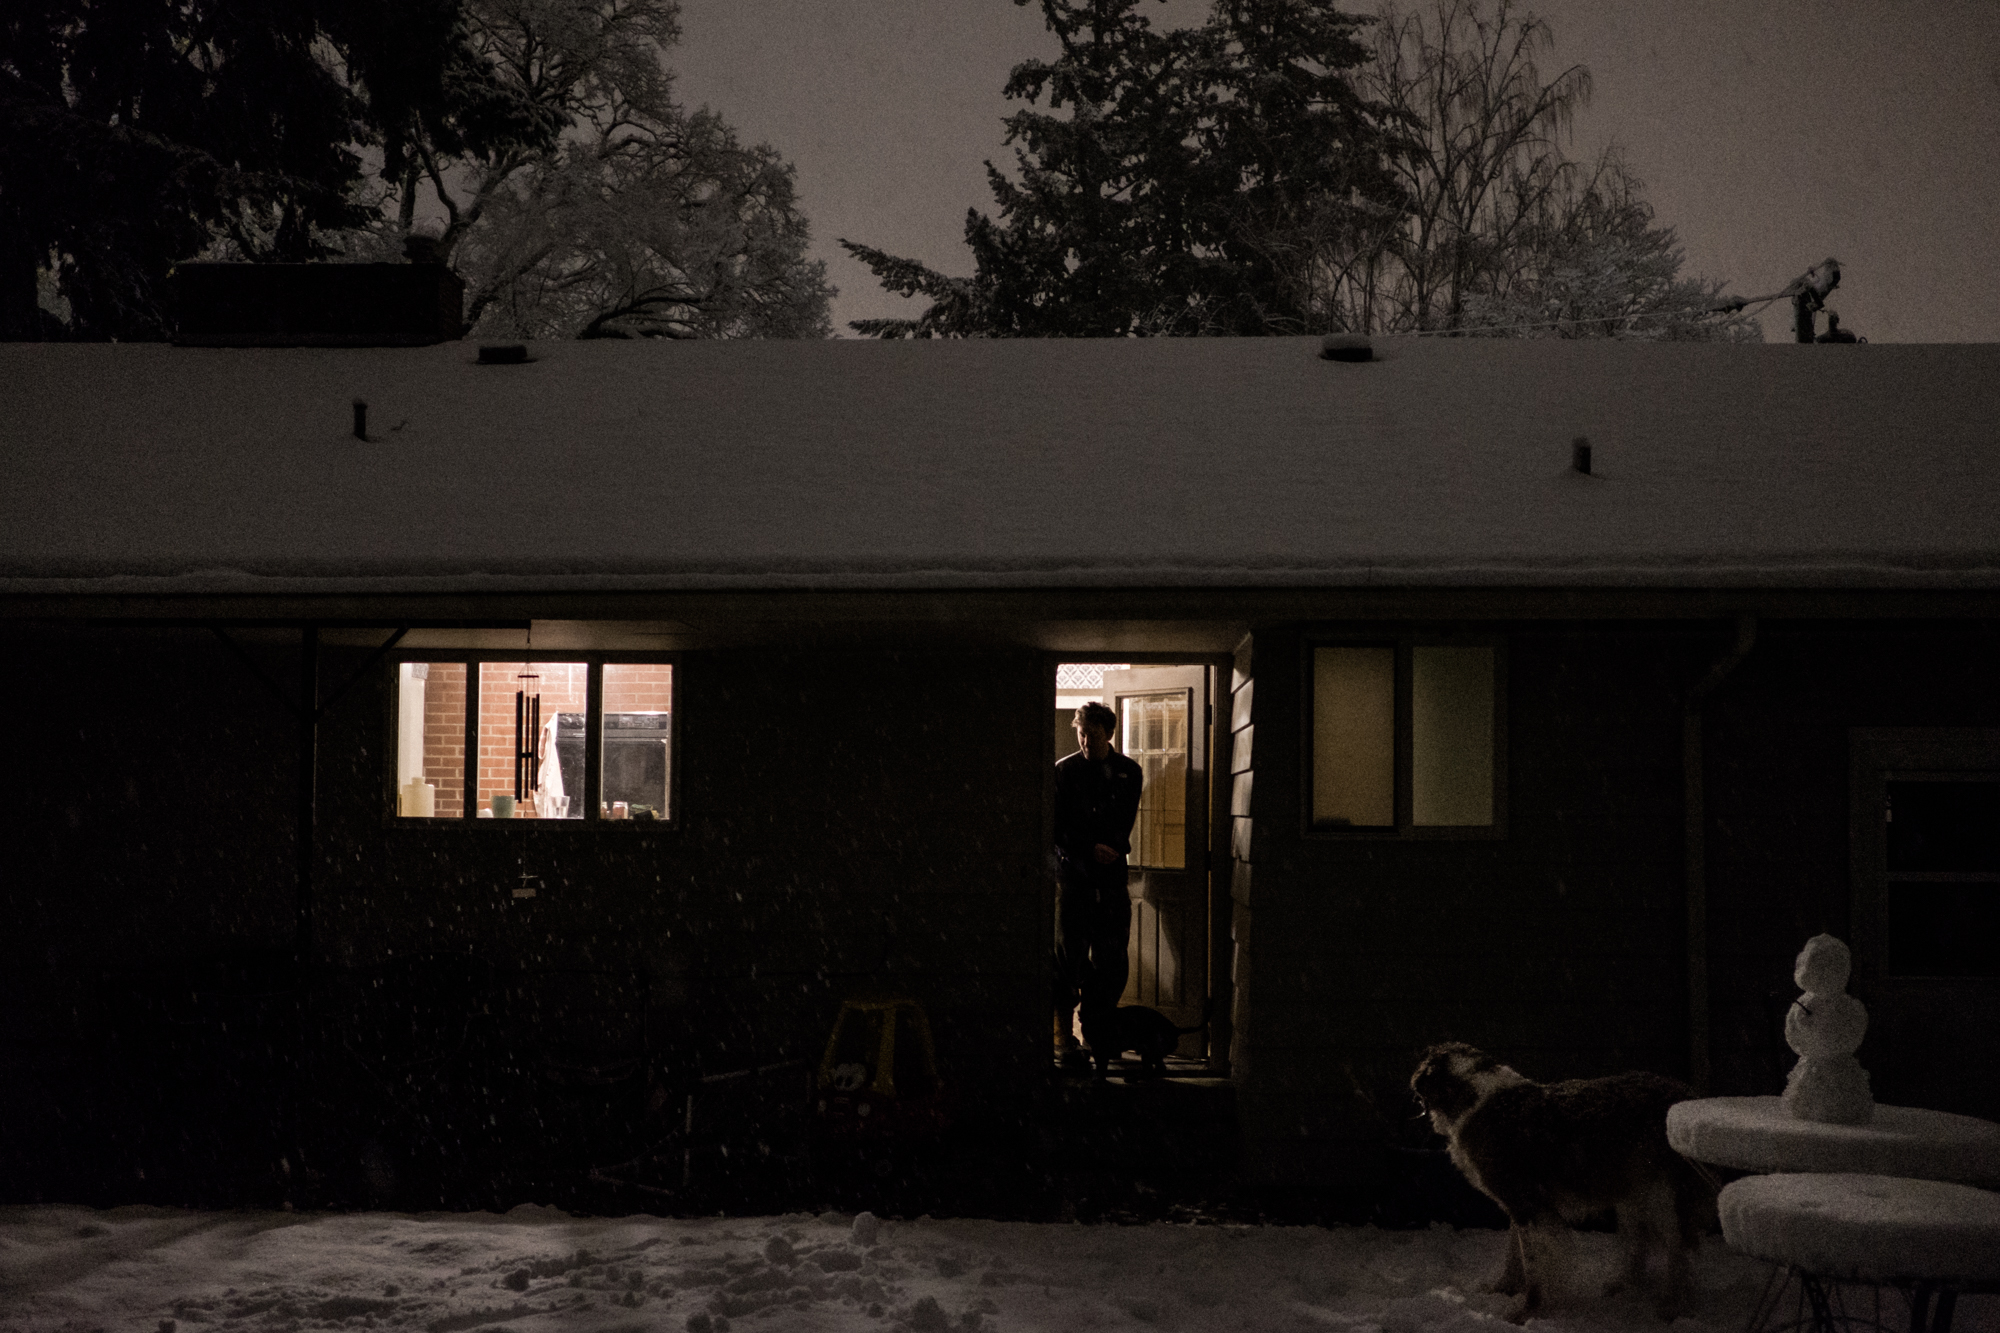 Man lets dog out at night -documentary family photography